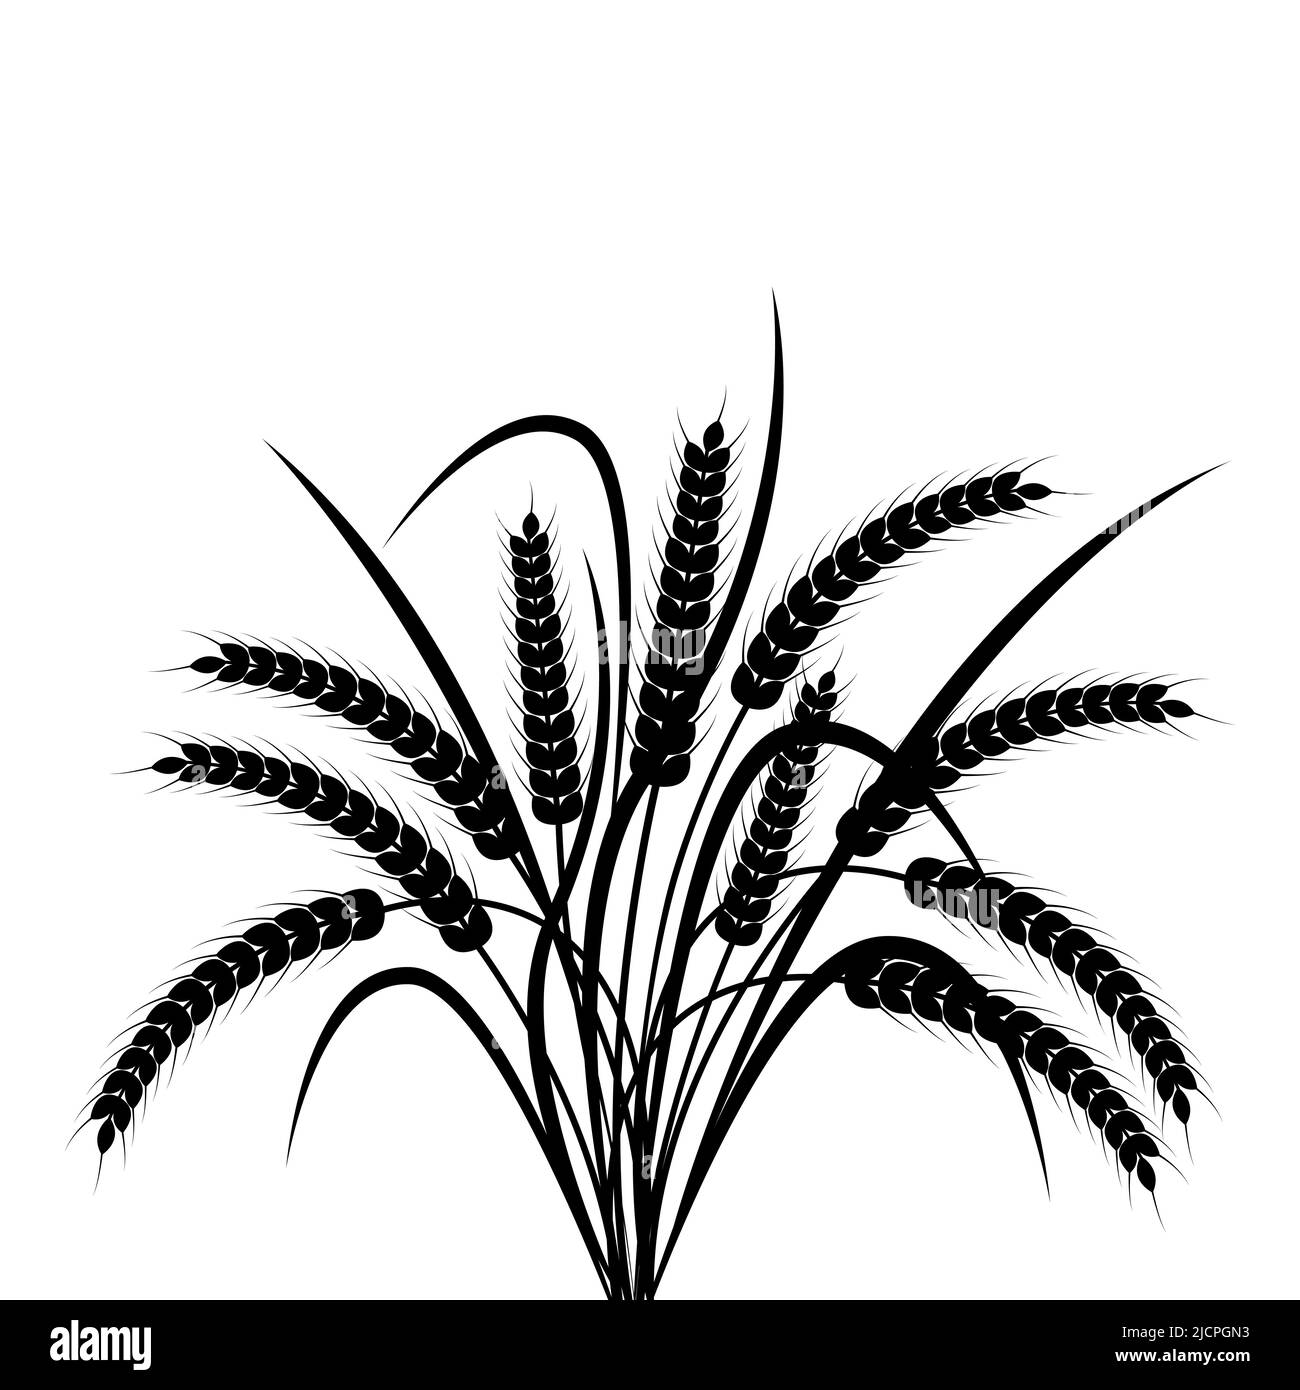 Bunch of ears of wheat on a transparent background. Black and white vector illustration Stock Vector